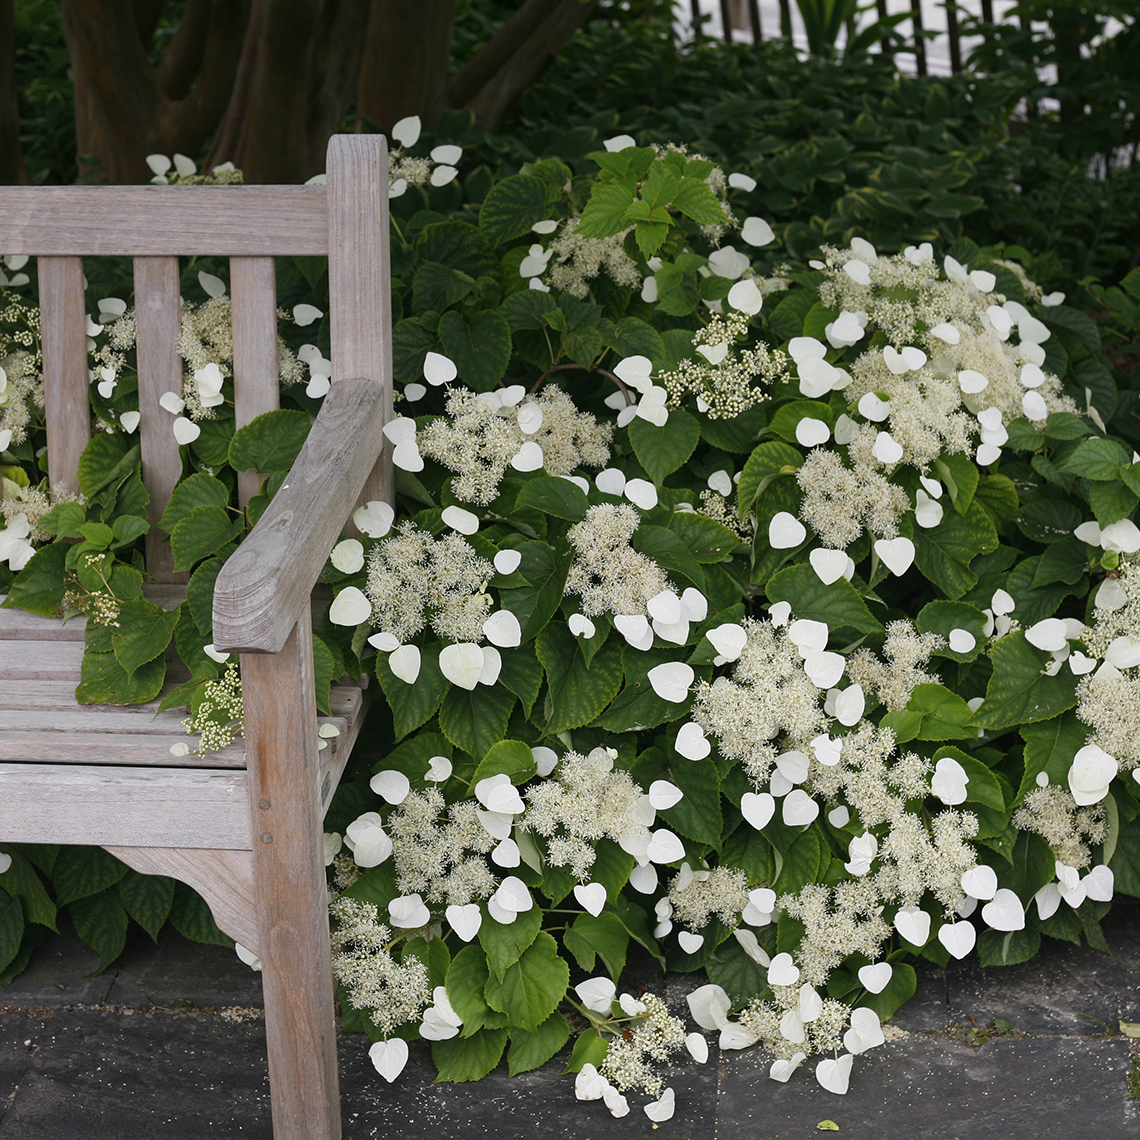 Moonlight Schizophragma blooming heavily next to wooden bench